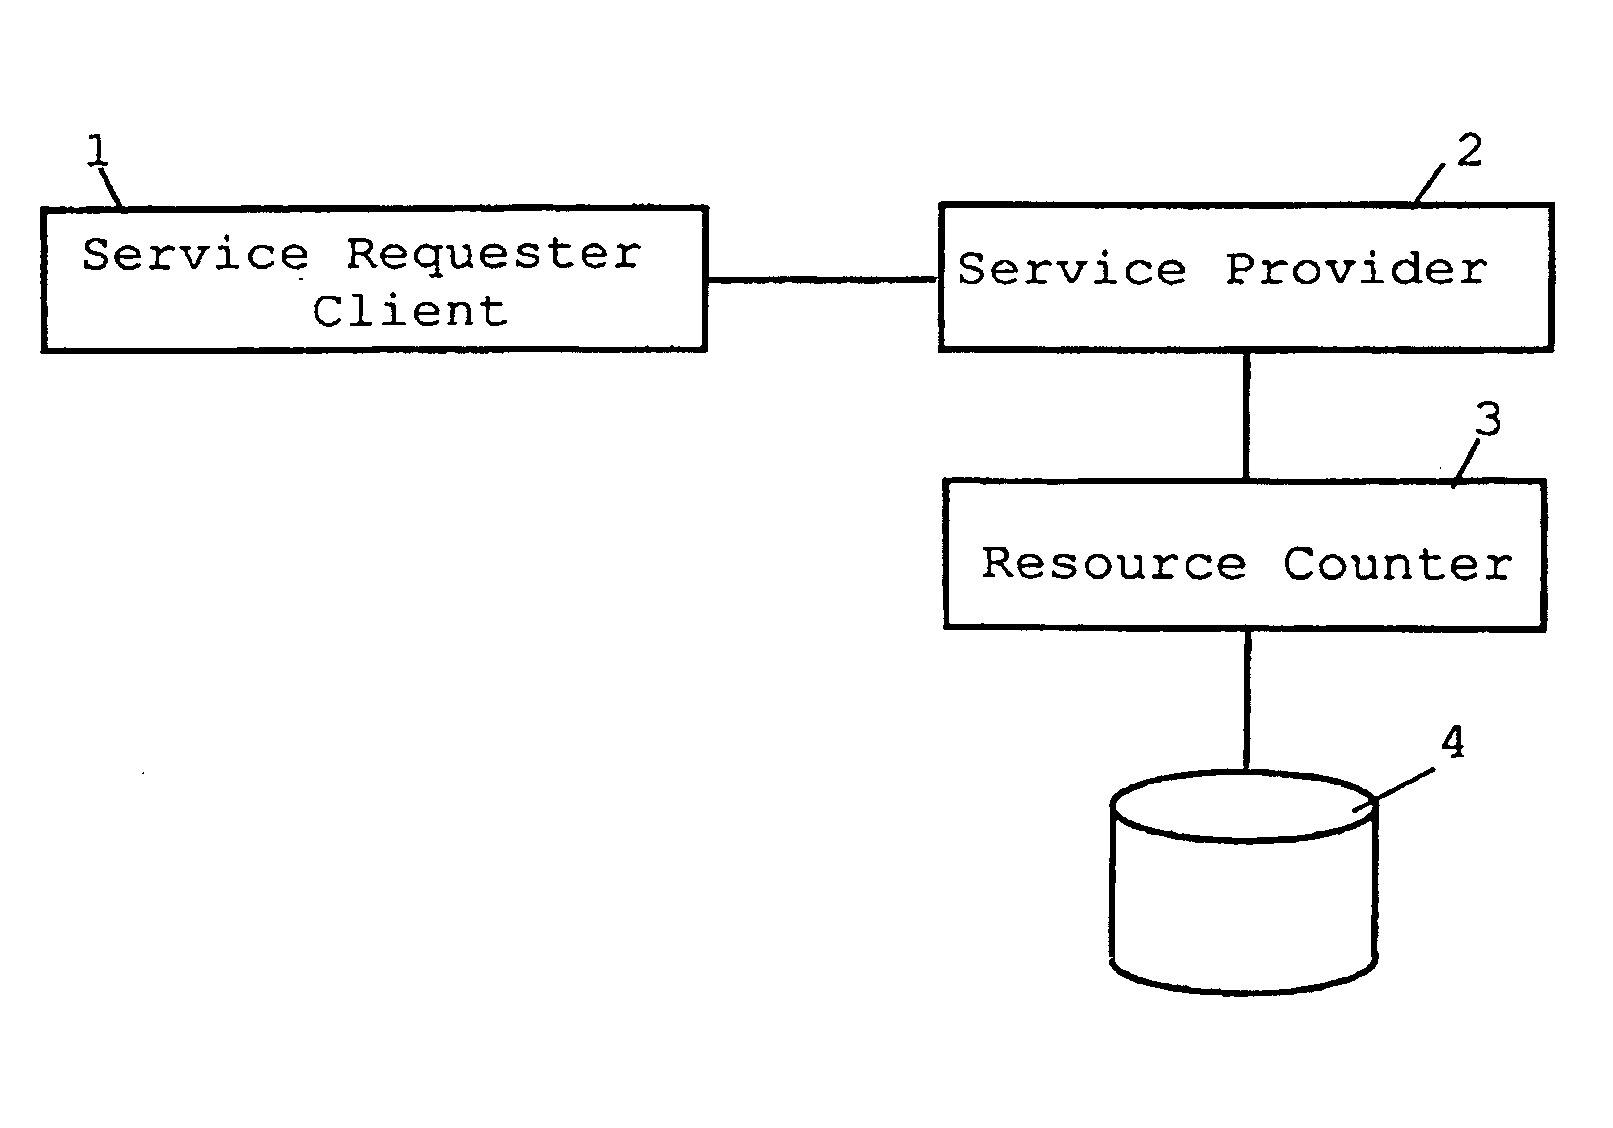 Counting and billing mechanism for web-services based on a soap-communication protocol